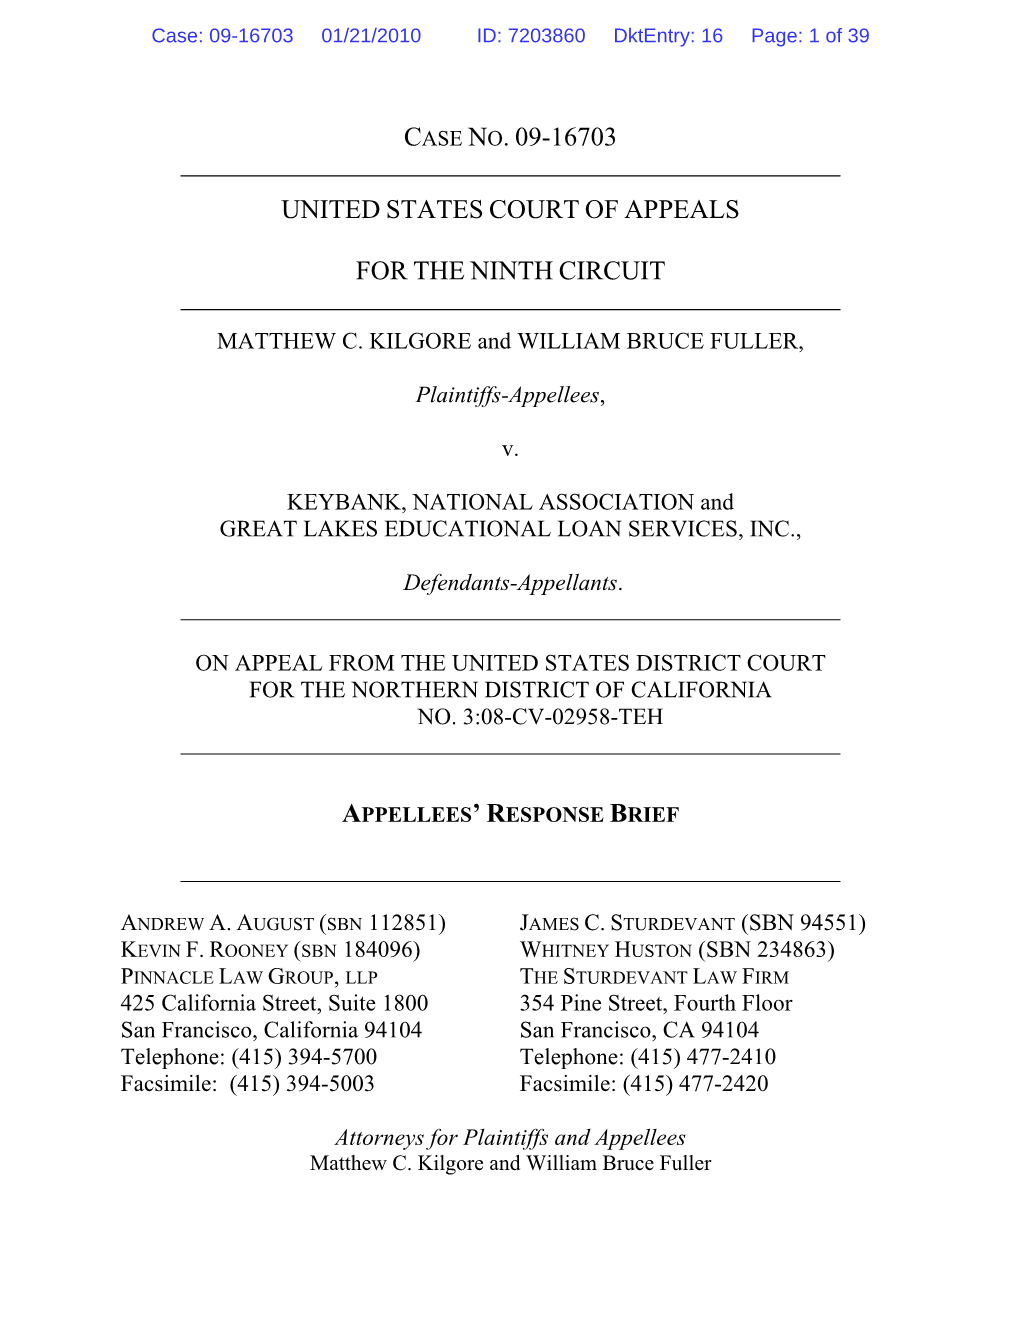 Case No. 09-16703 United States Court of Appeals For